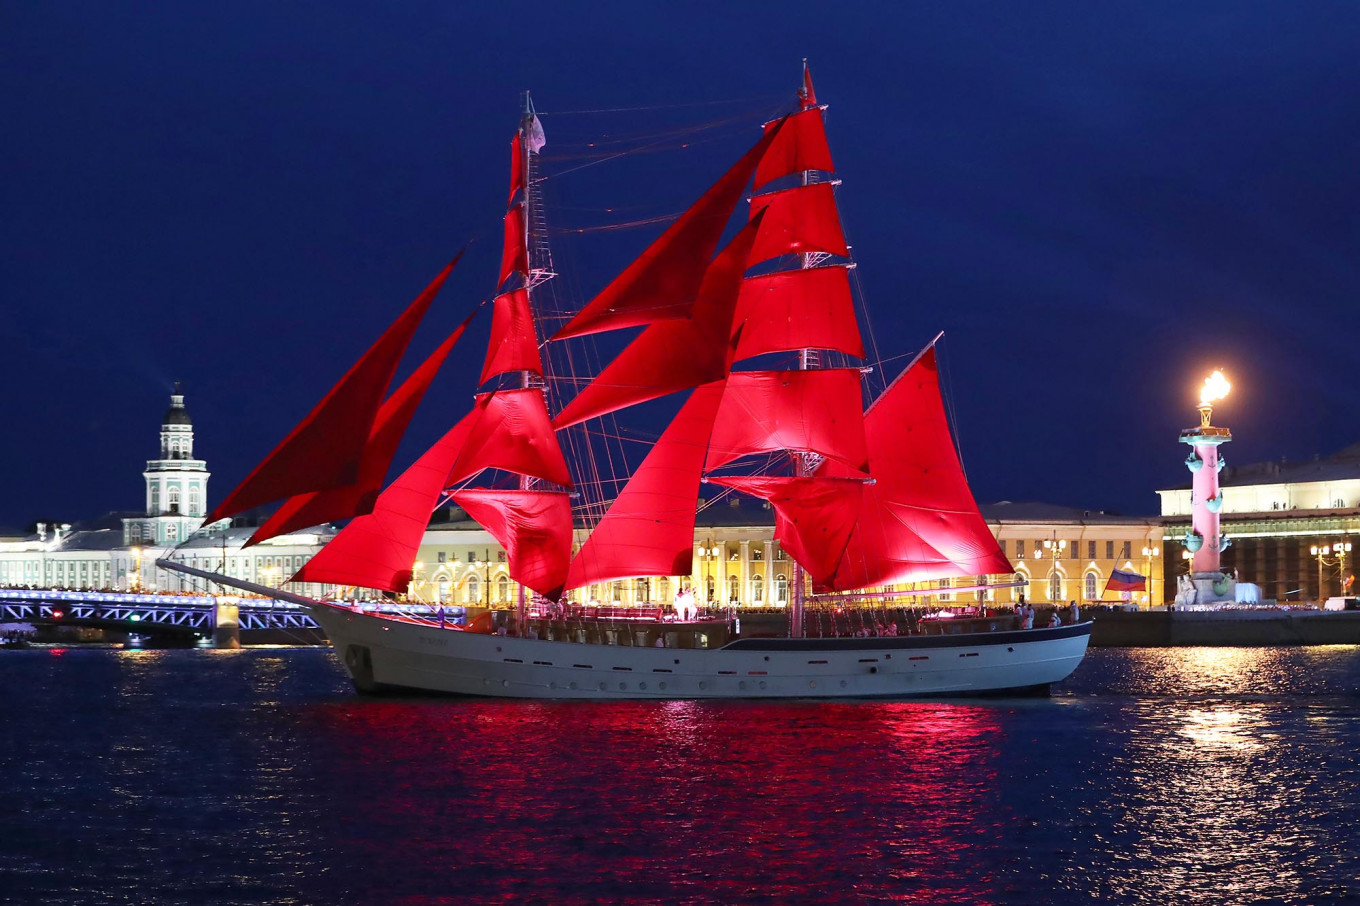 St. Petersburg Revels Among Scarlet Sails and White Nights